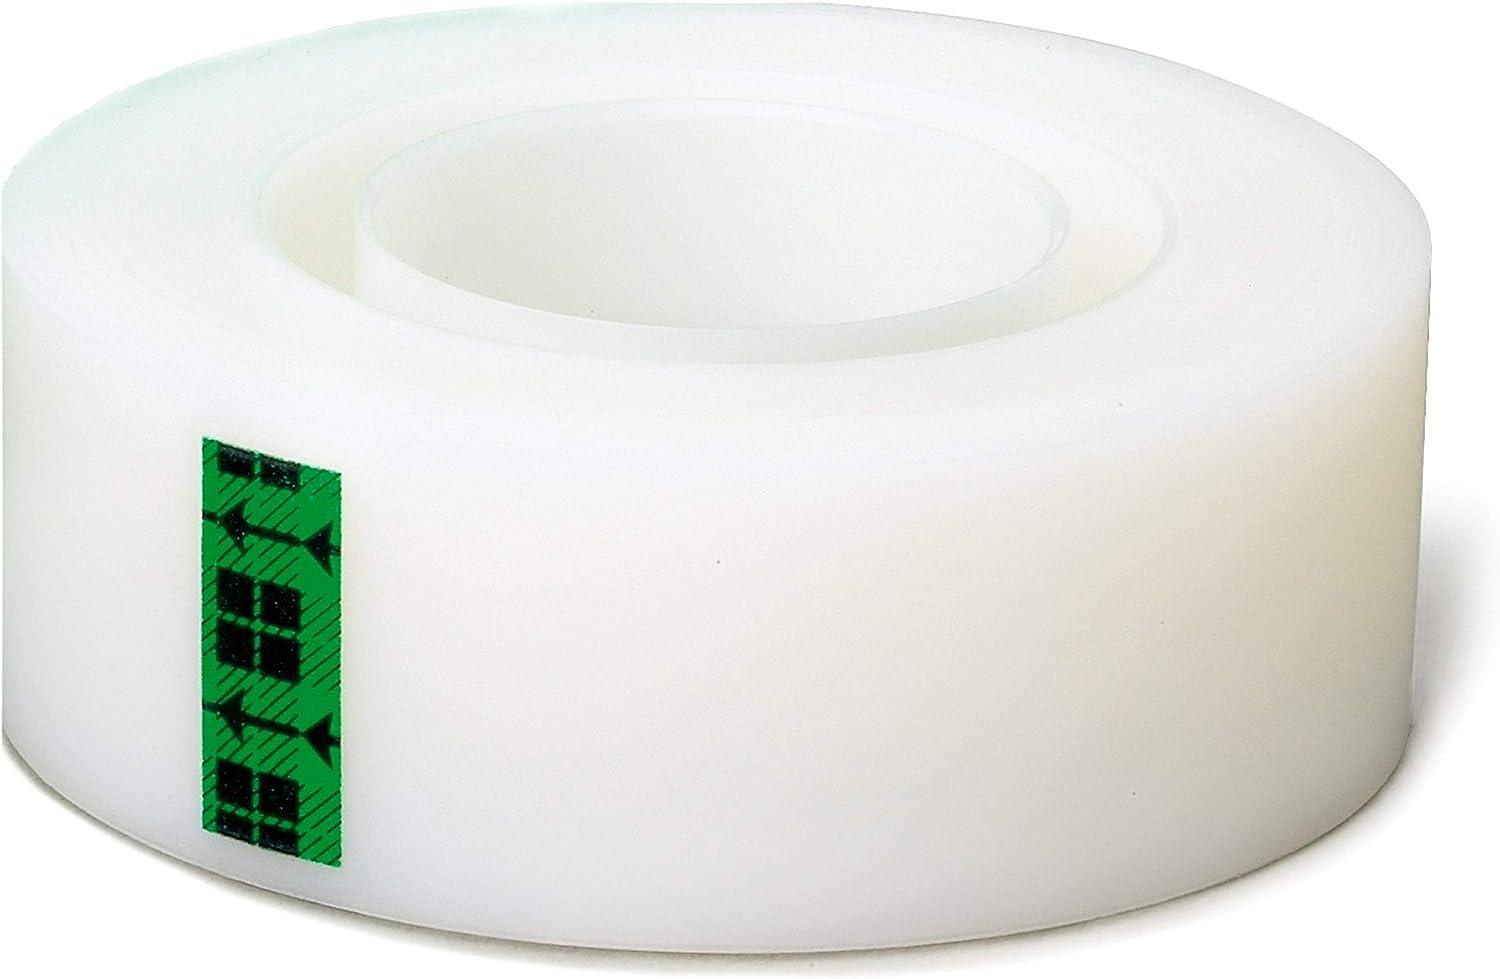 Scotch Magic Tape, 6 Rolls with Dispenser, Numerous Applications,  Invisible, Engineered for Repairing, 3/4 x 1000 Inches, Boxed (810K6C38)